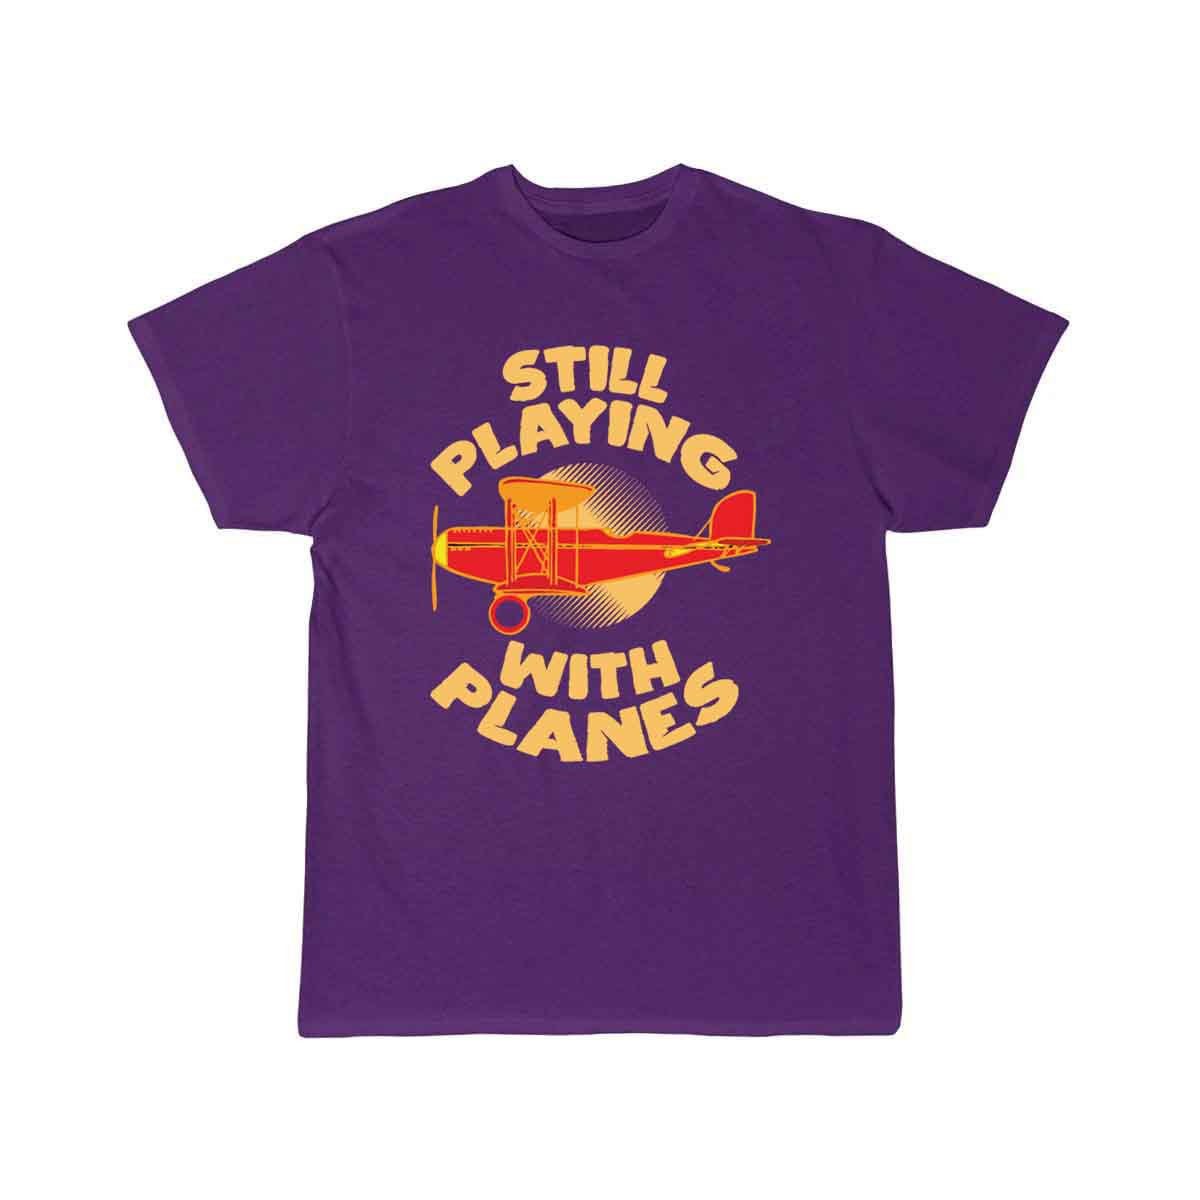 Plkaying with planes T SHIRT THE AV8R